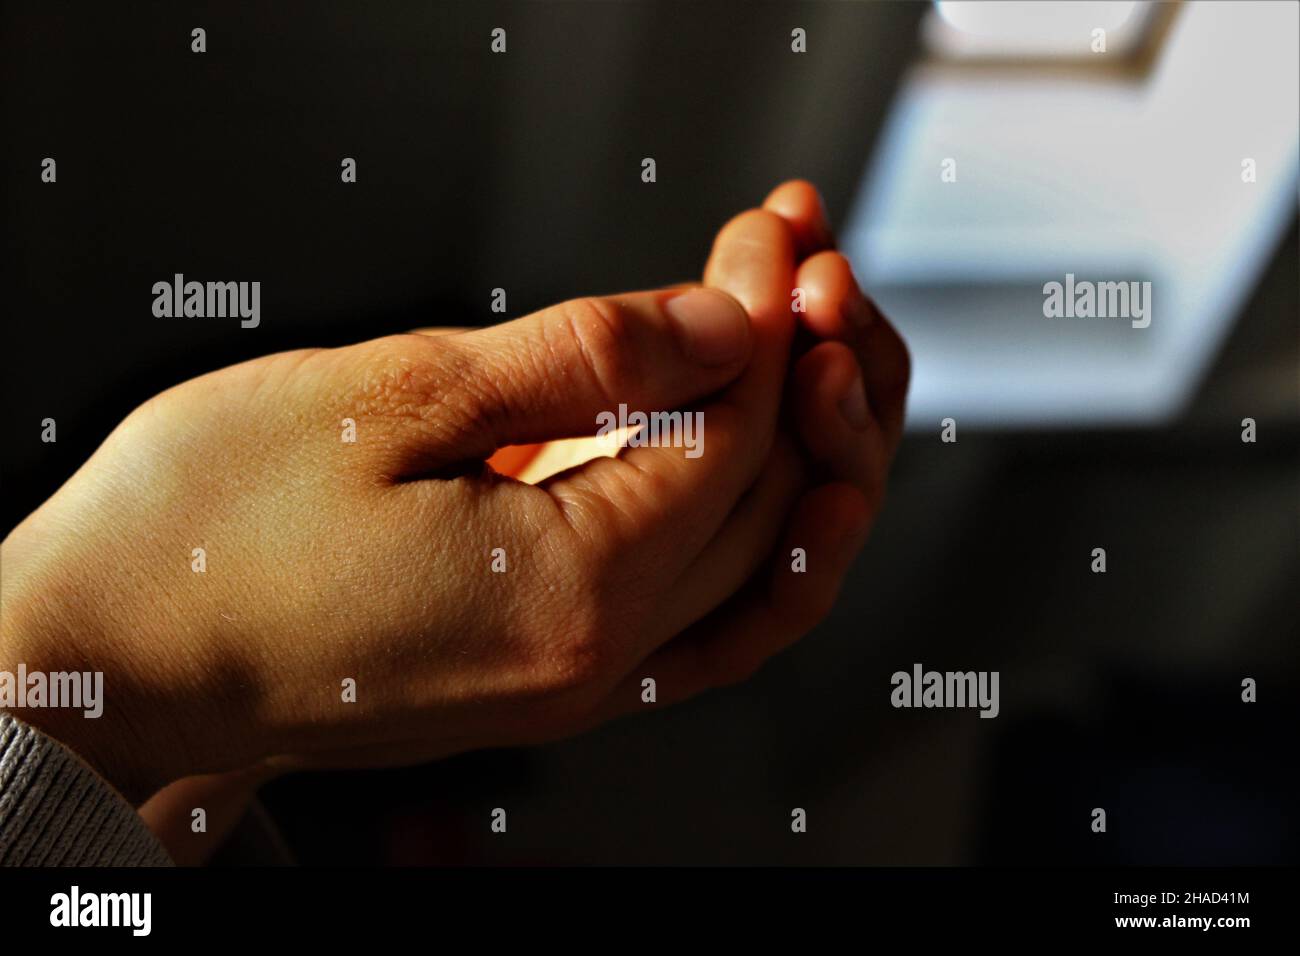 Woman cupping hands in the light on a dark background ready to receive something in her palms. Religious concept, receiving eucharist Stock Photo